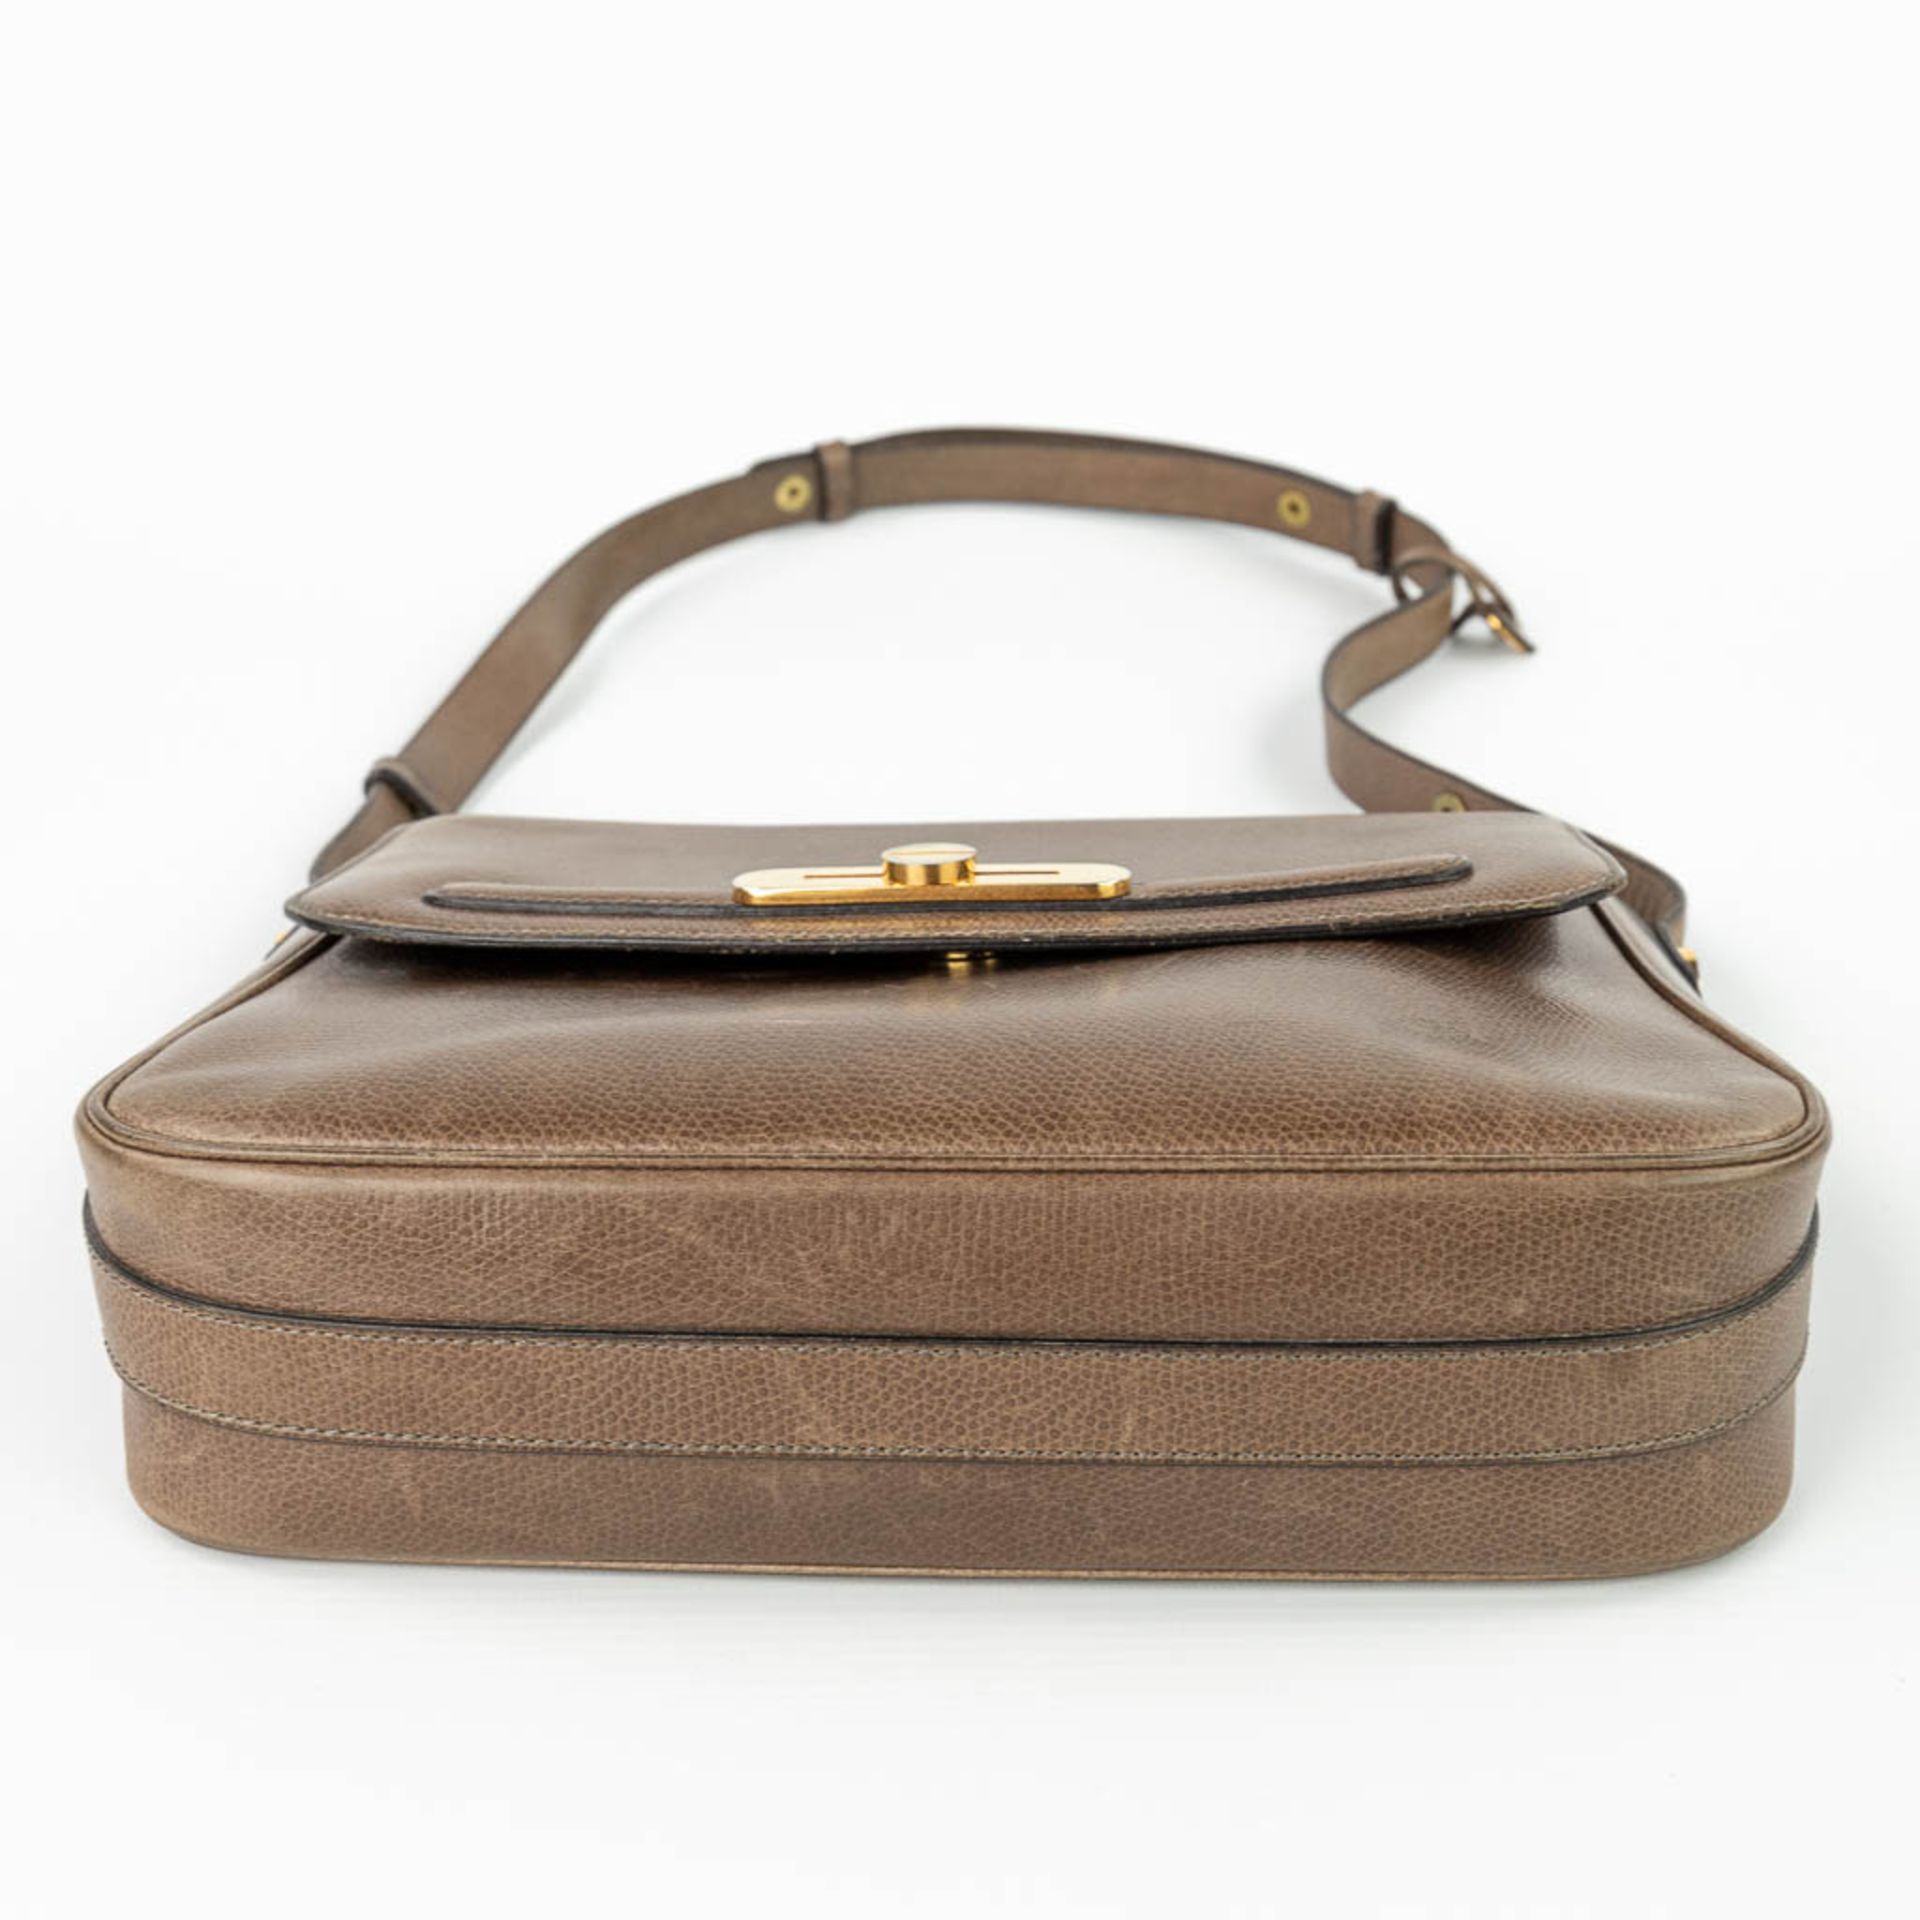 A handbag made of brown leather and marked Delvaux. (H:22cm) - Image 4 of 14